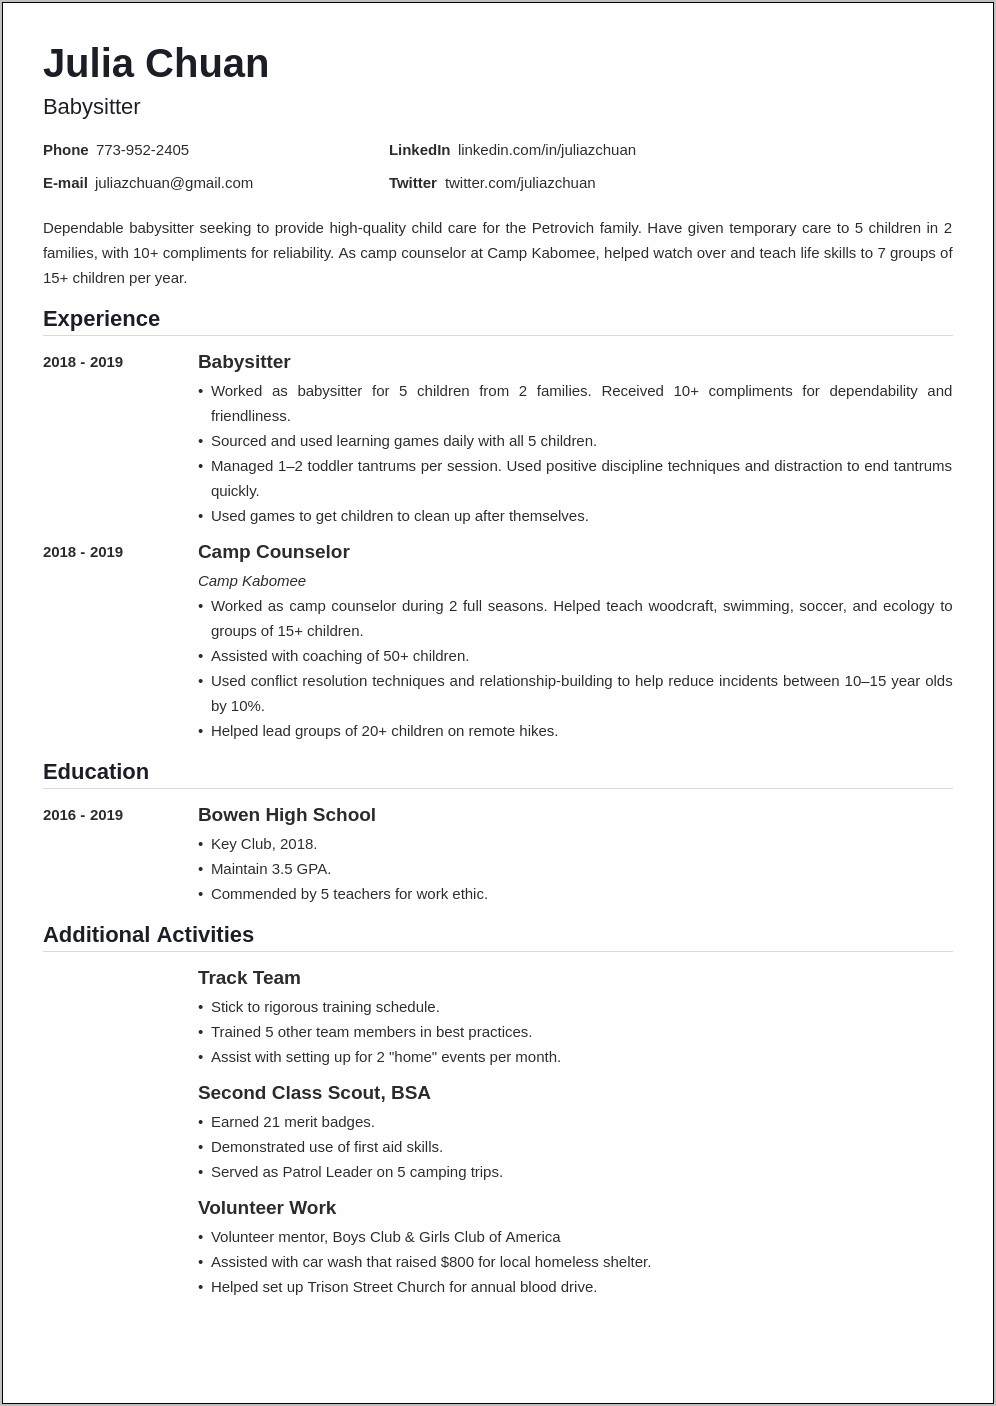 Resume Skills For 2 Year Old Daycare Helper